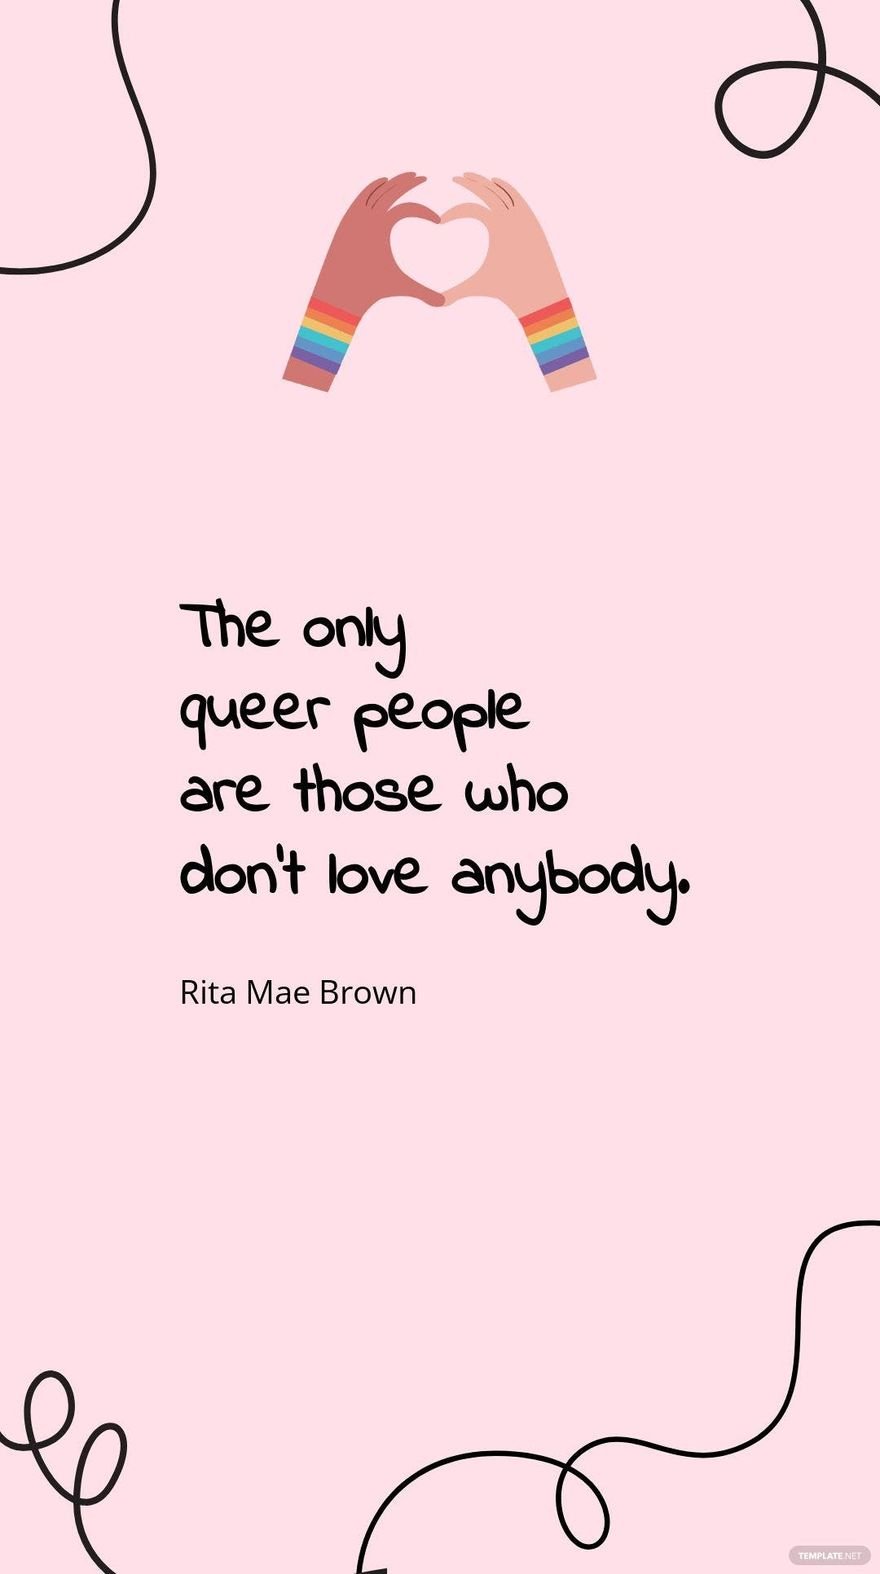 Rita Mae Brown - The only queer people are those who don’t love anybody. Template